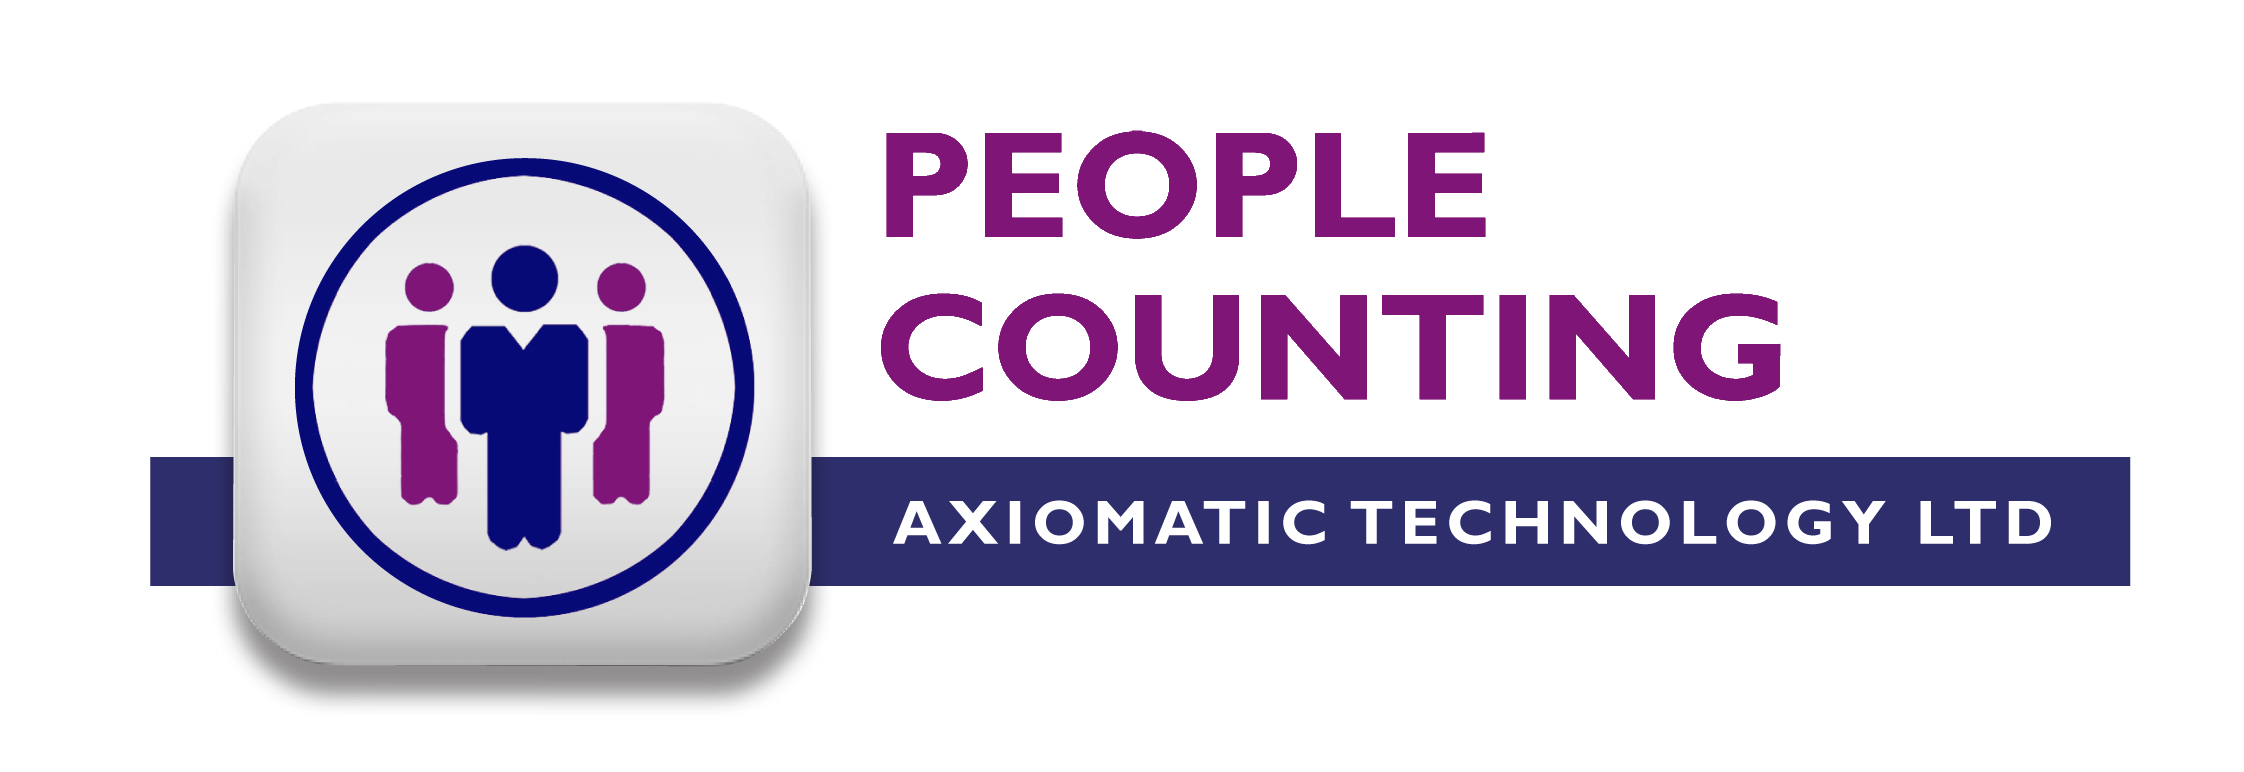 Axiomatic Technology Limited